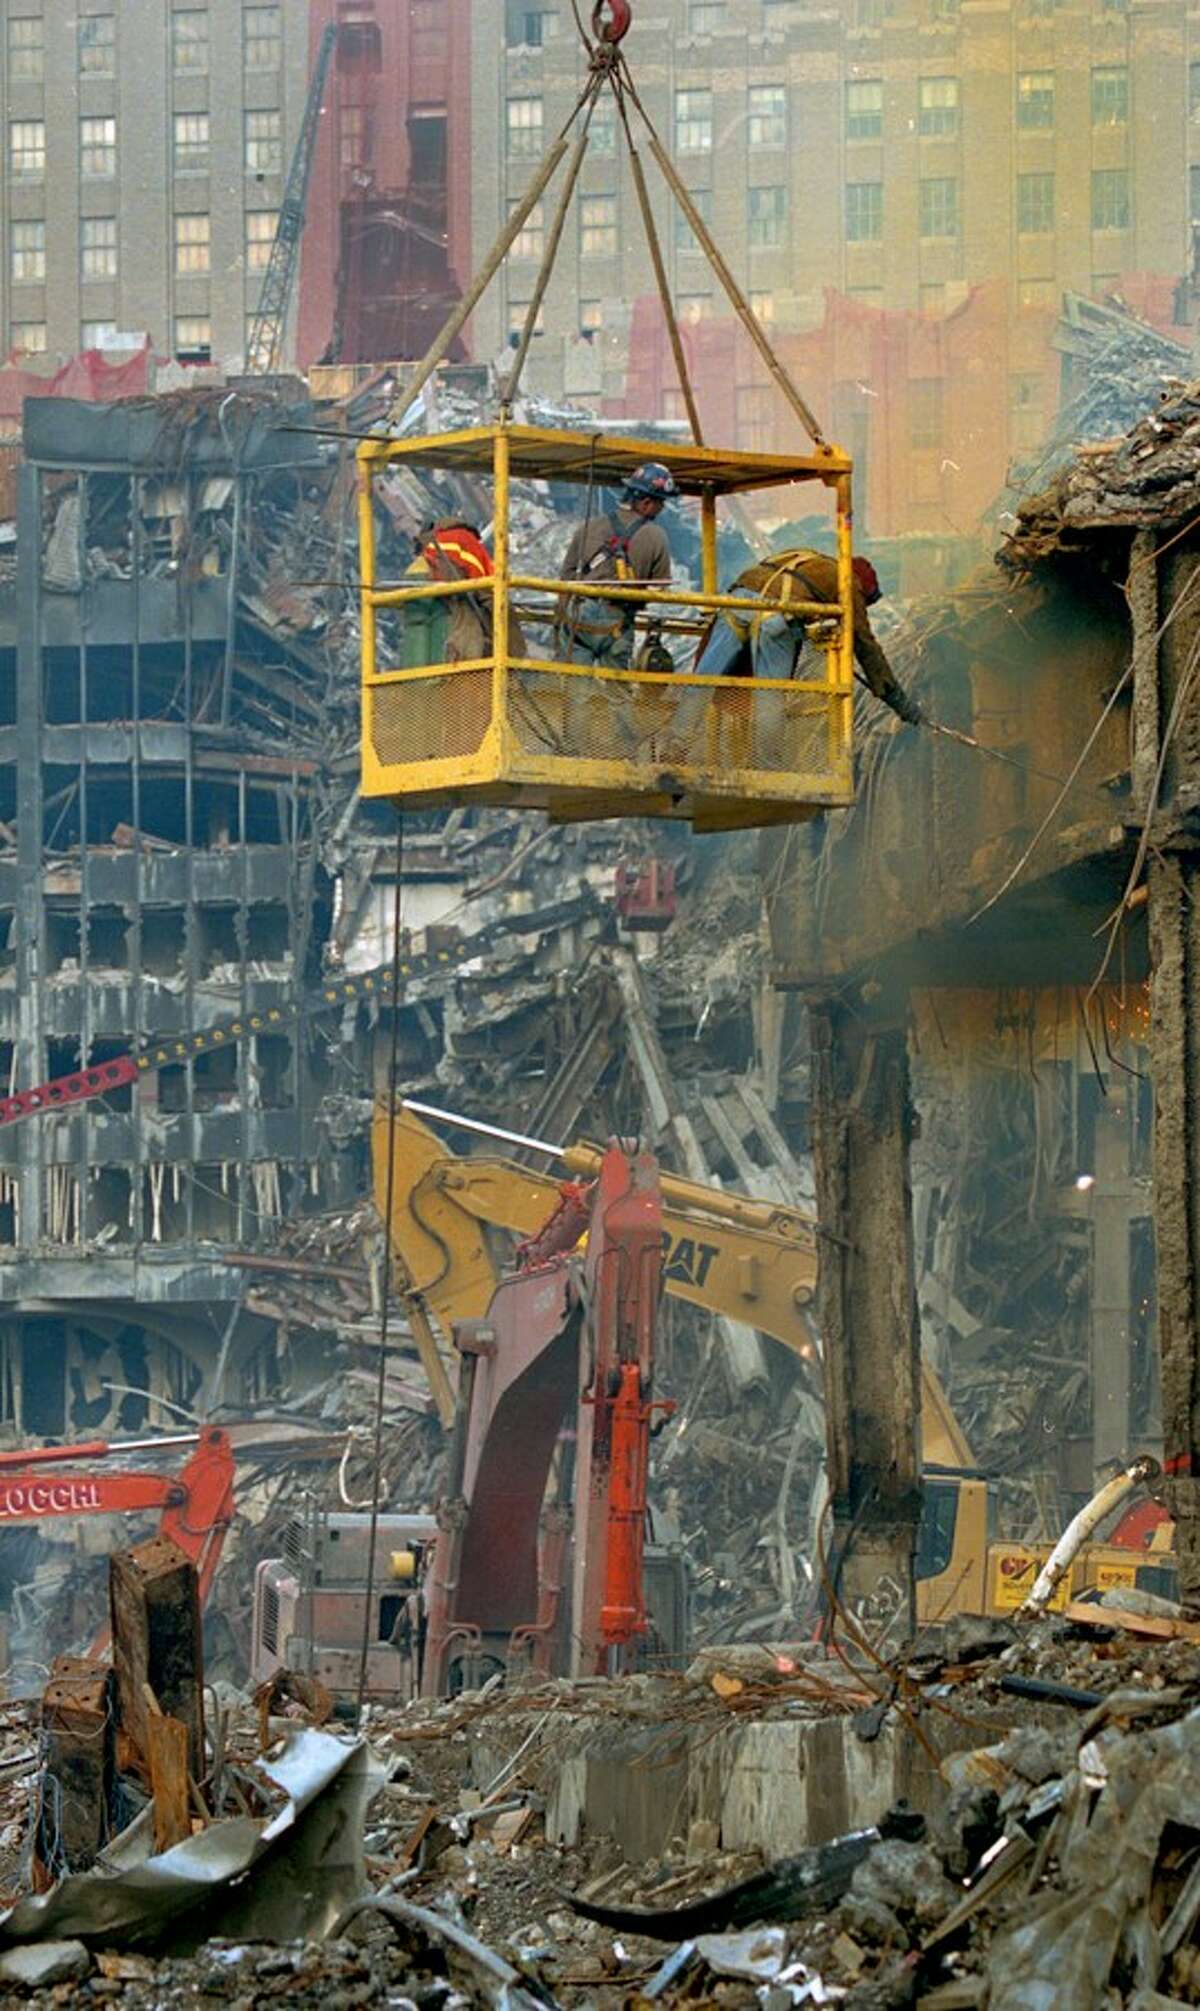 Earl Dotter documented search-and-recovery efforts at Ground Zero following 9/11.